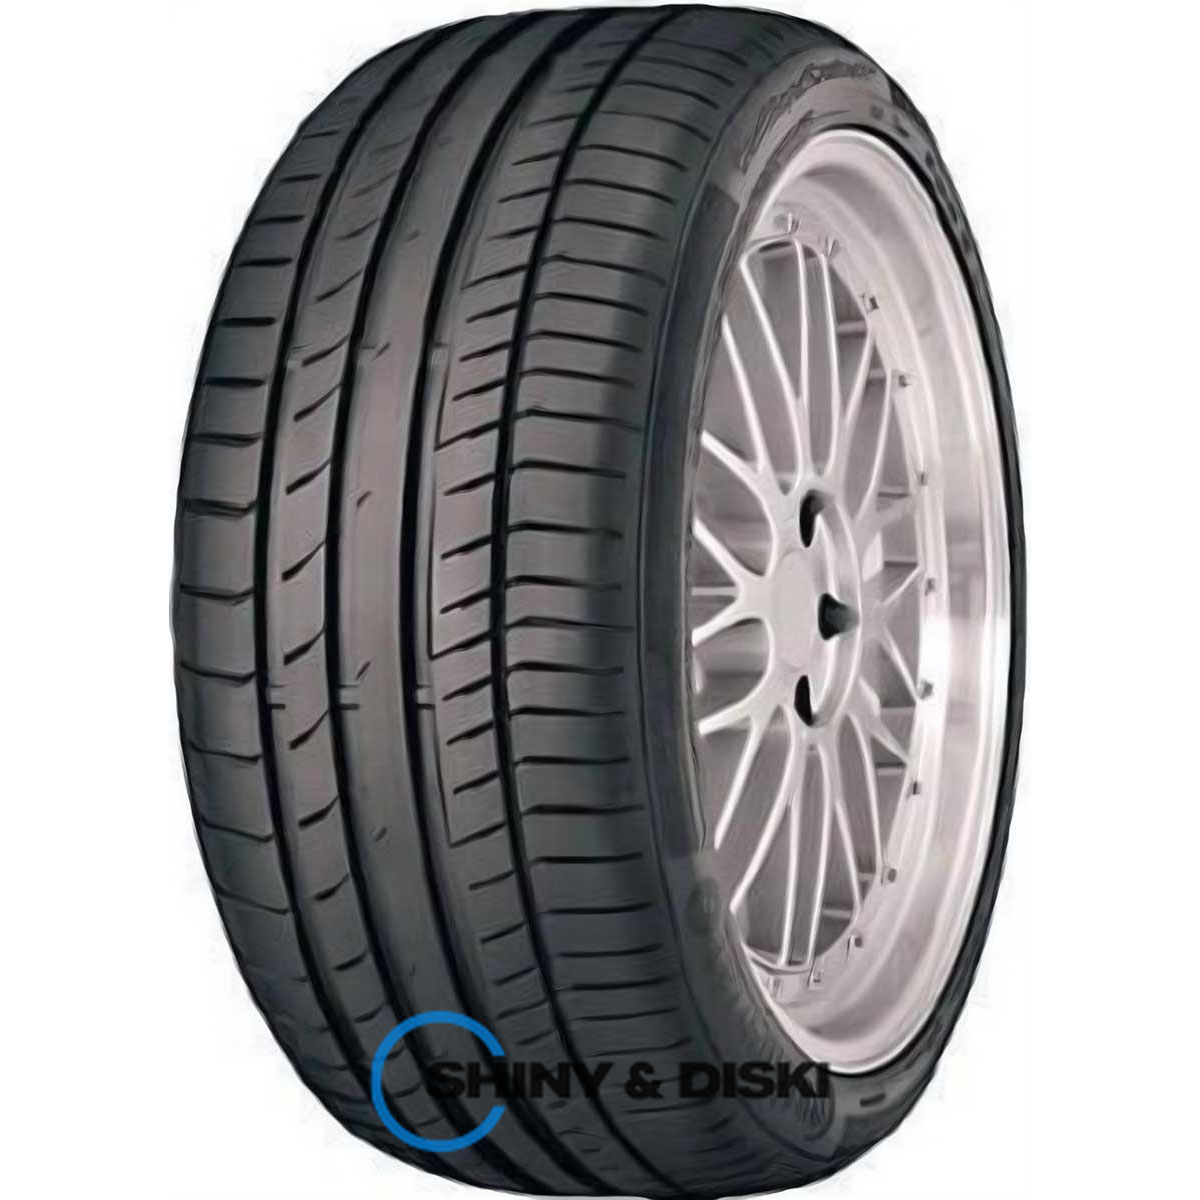 continental sportcontact 5p 285/30 r20 99y xl